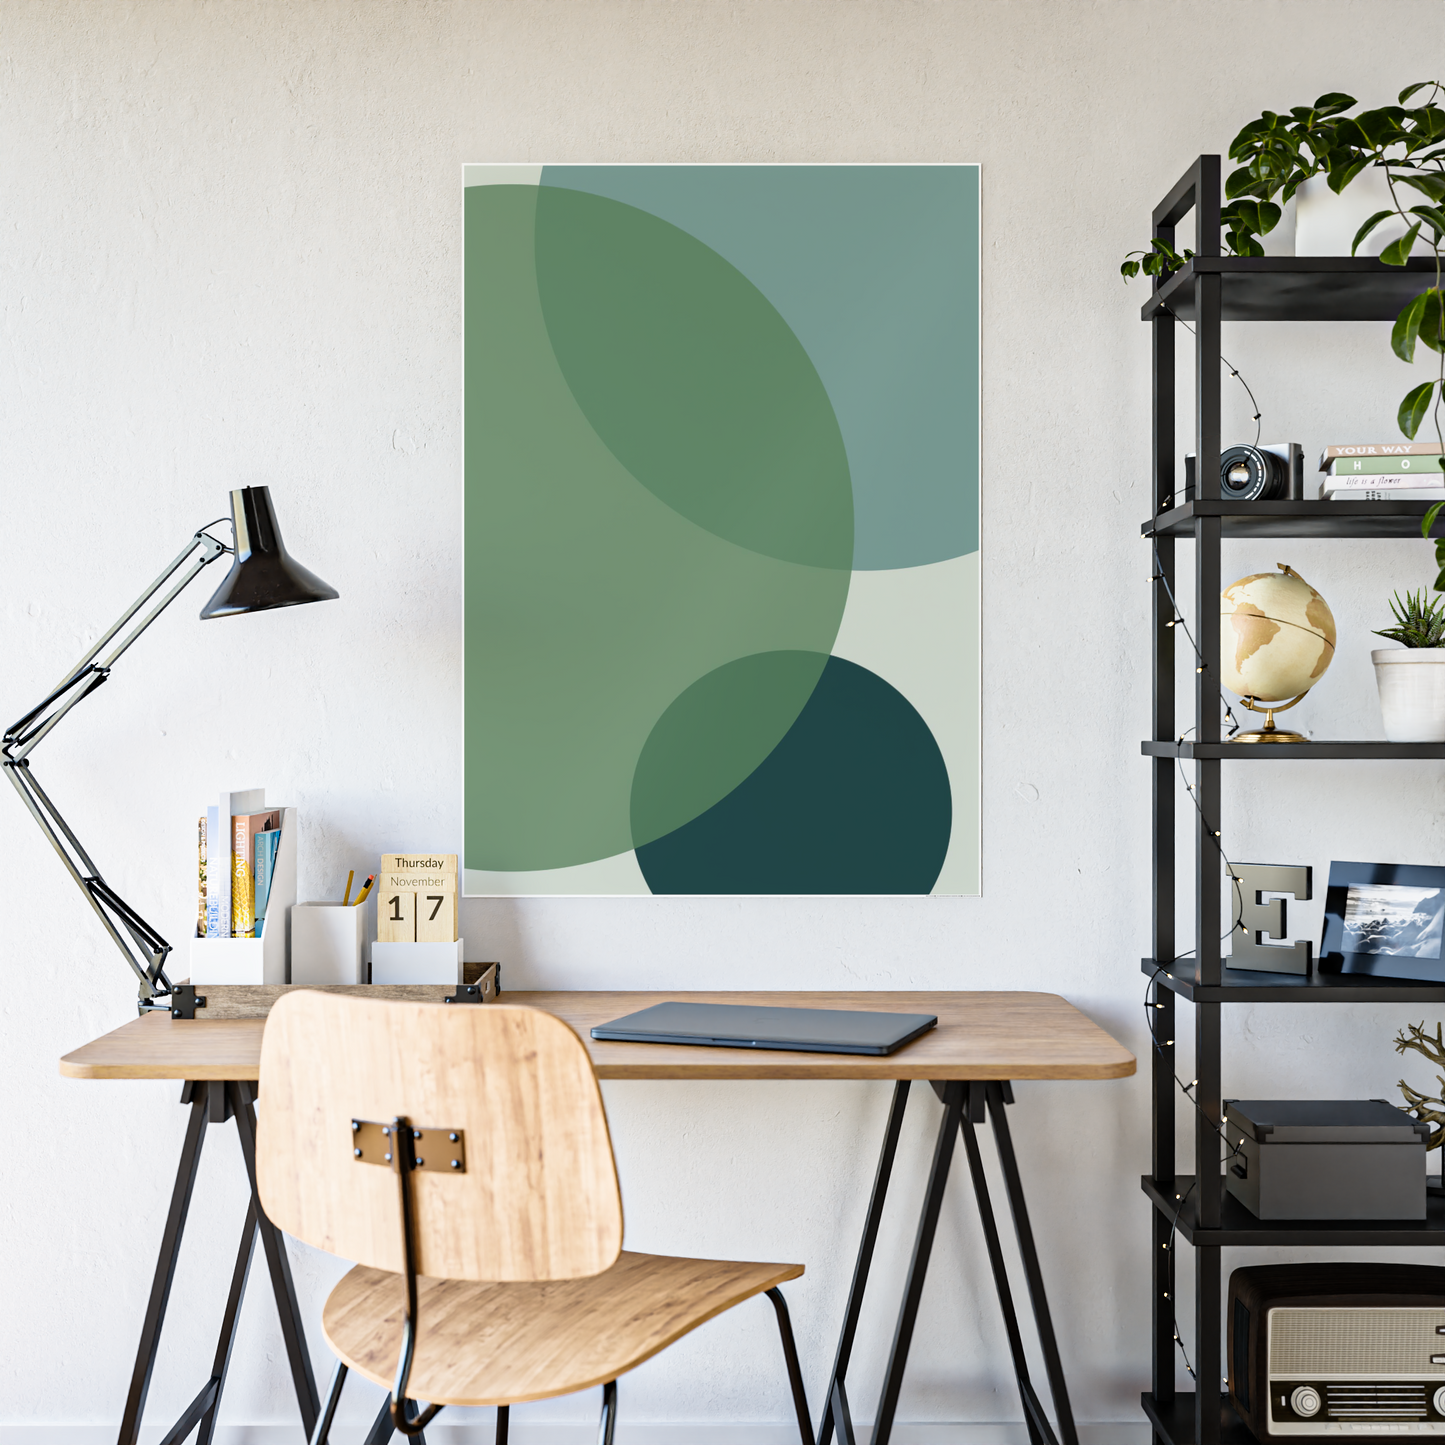 Serene Simplicity: Art Prints on Canvas for a Peaceful Home Decor